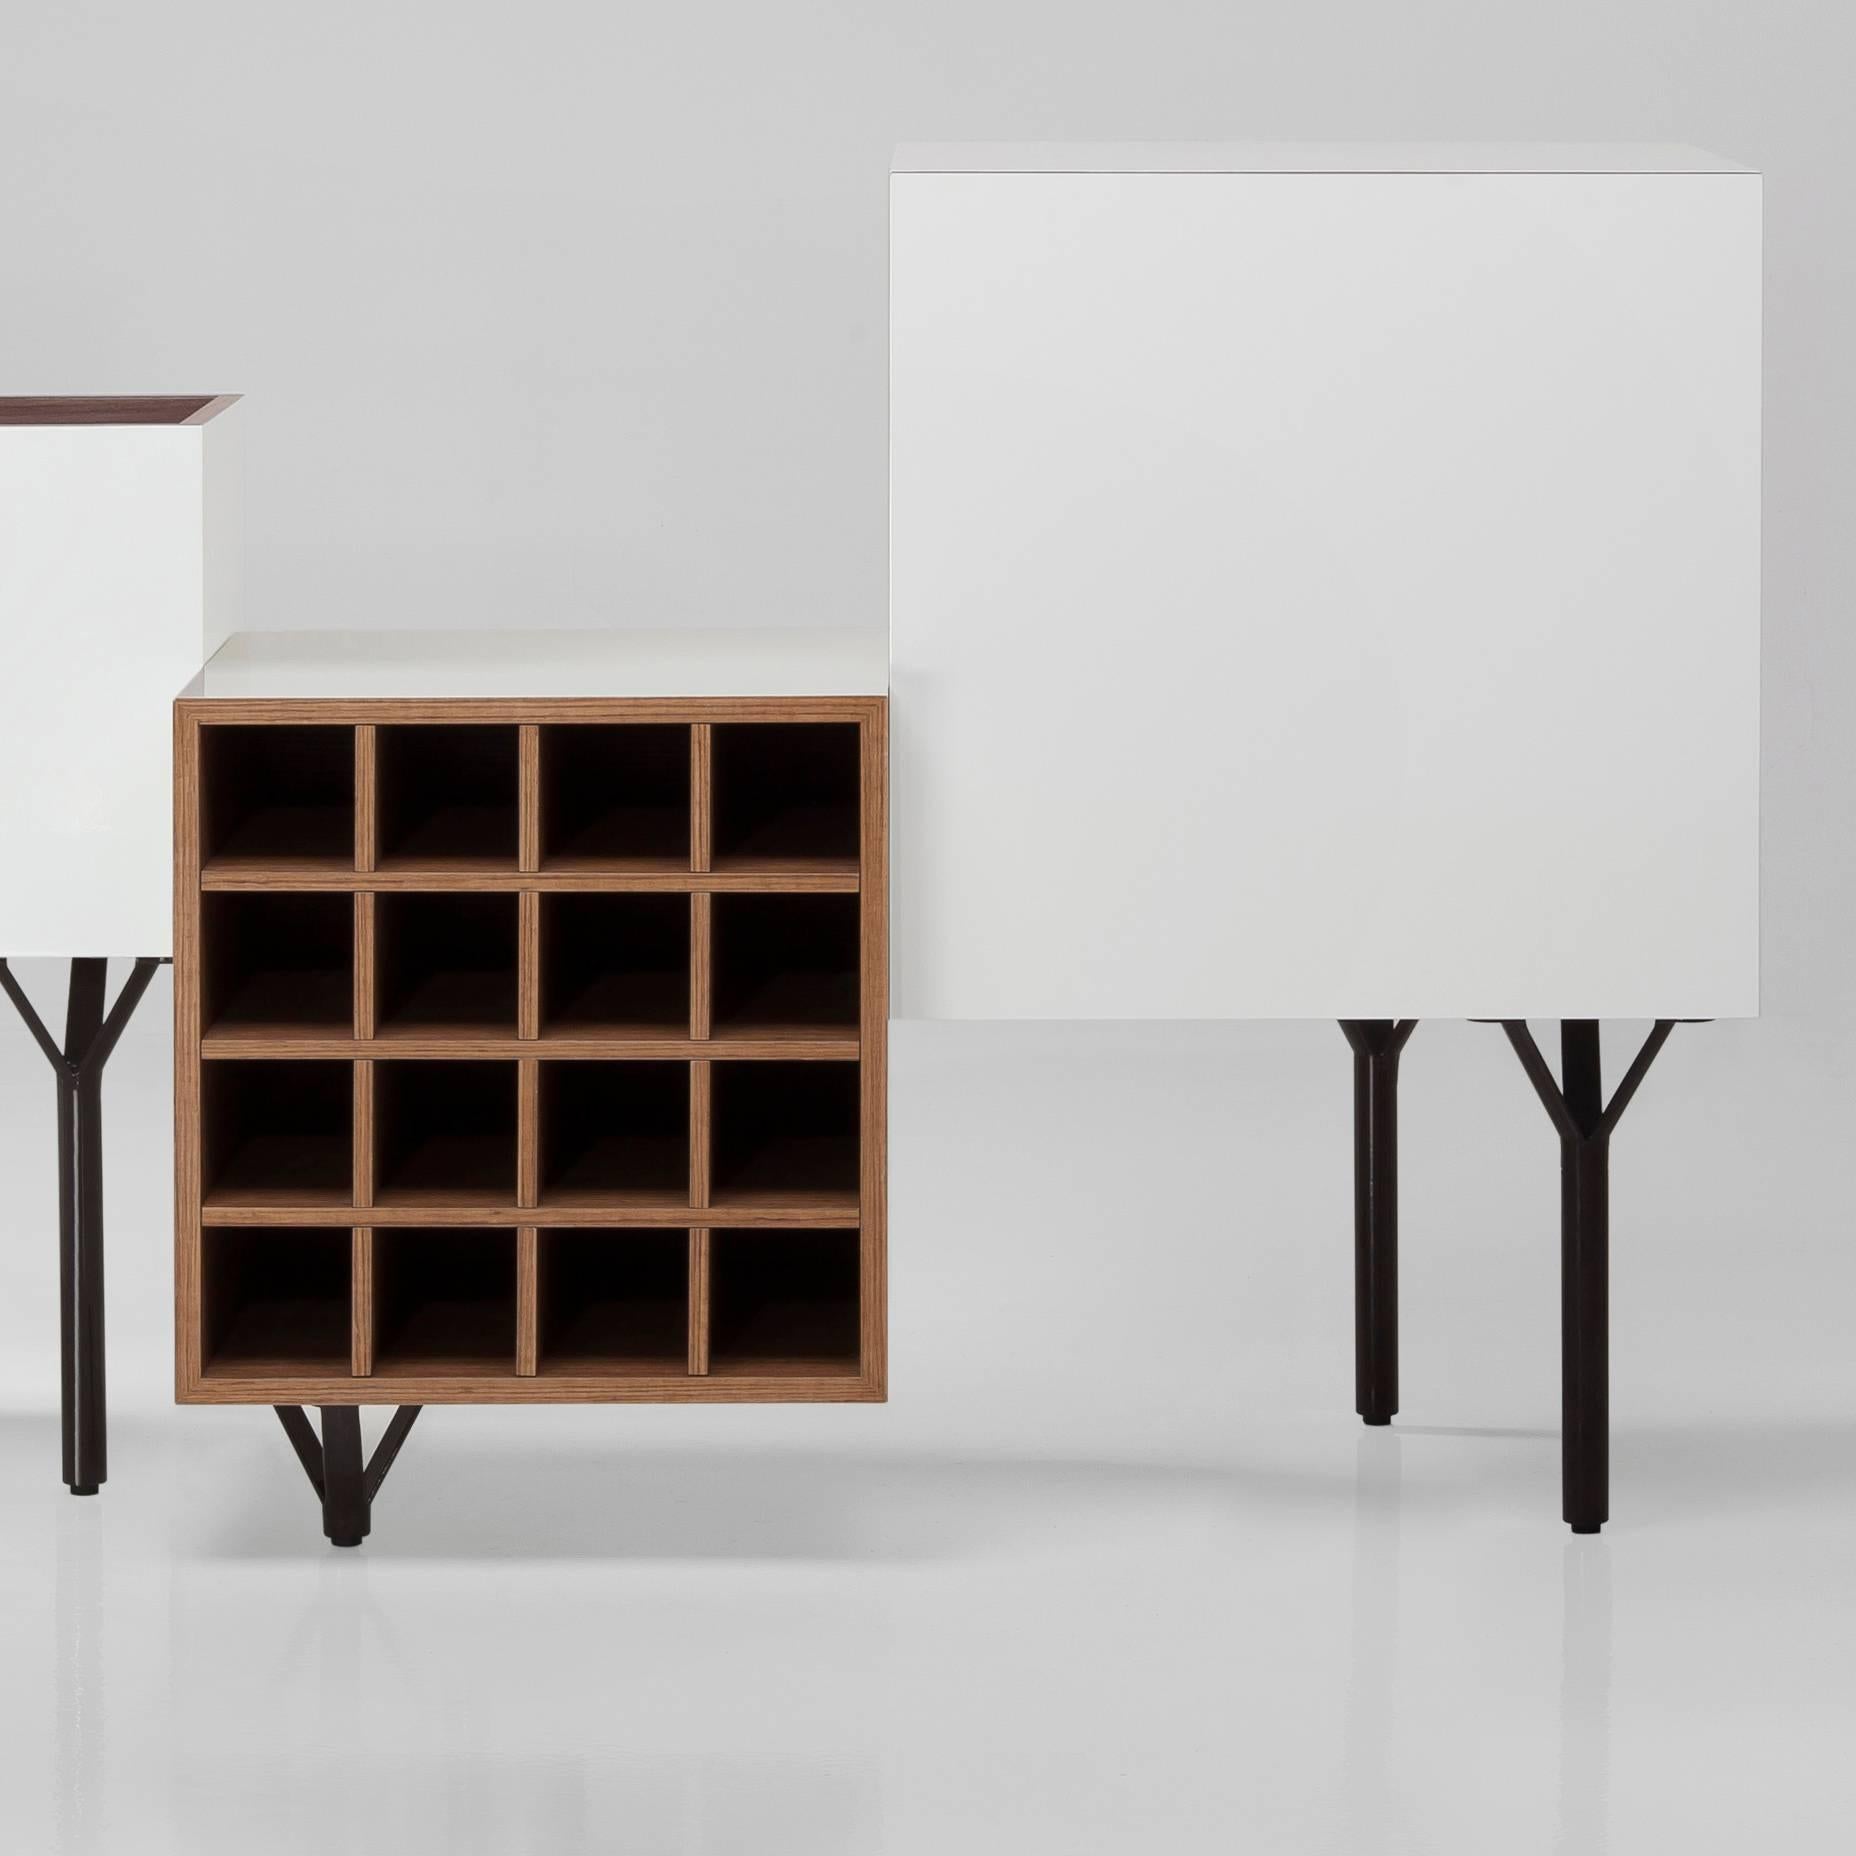 Cabinet designed by Martí Guixé in 2011 and manufactured by BD Barcelona.

This modular furniture is made of container cubes with various functions. They are dynamic both in their volume and in their positioning and finish. The woods, all